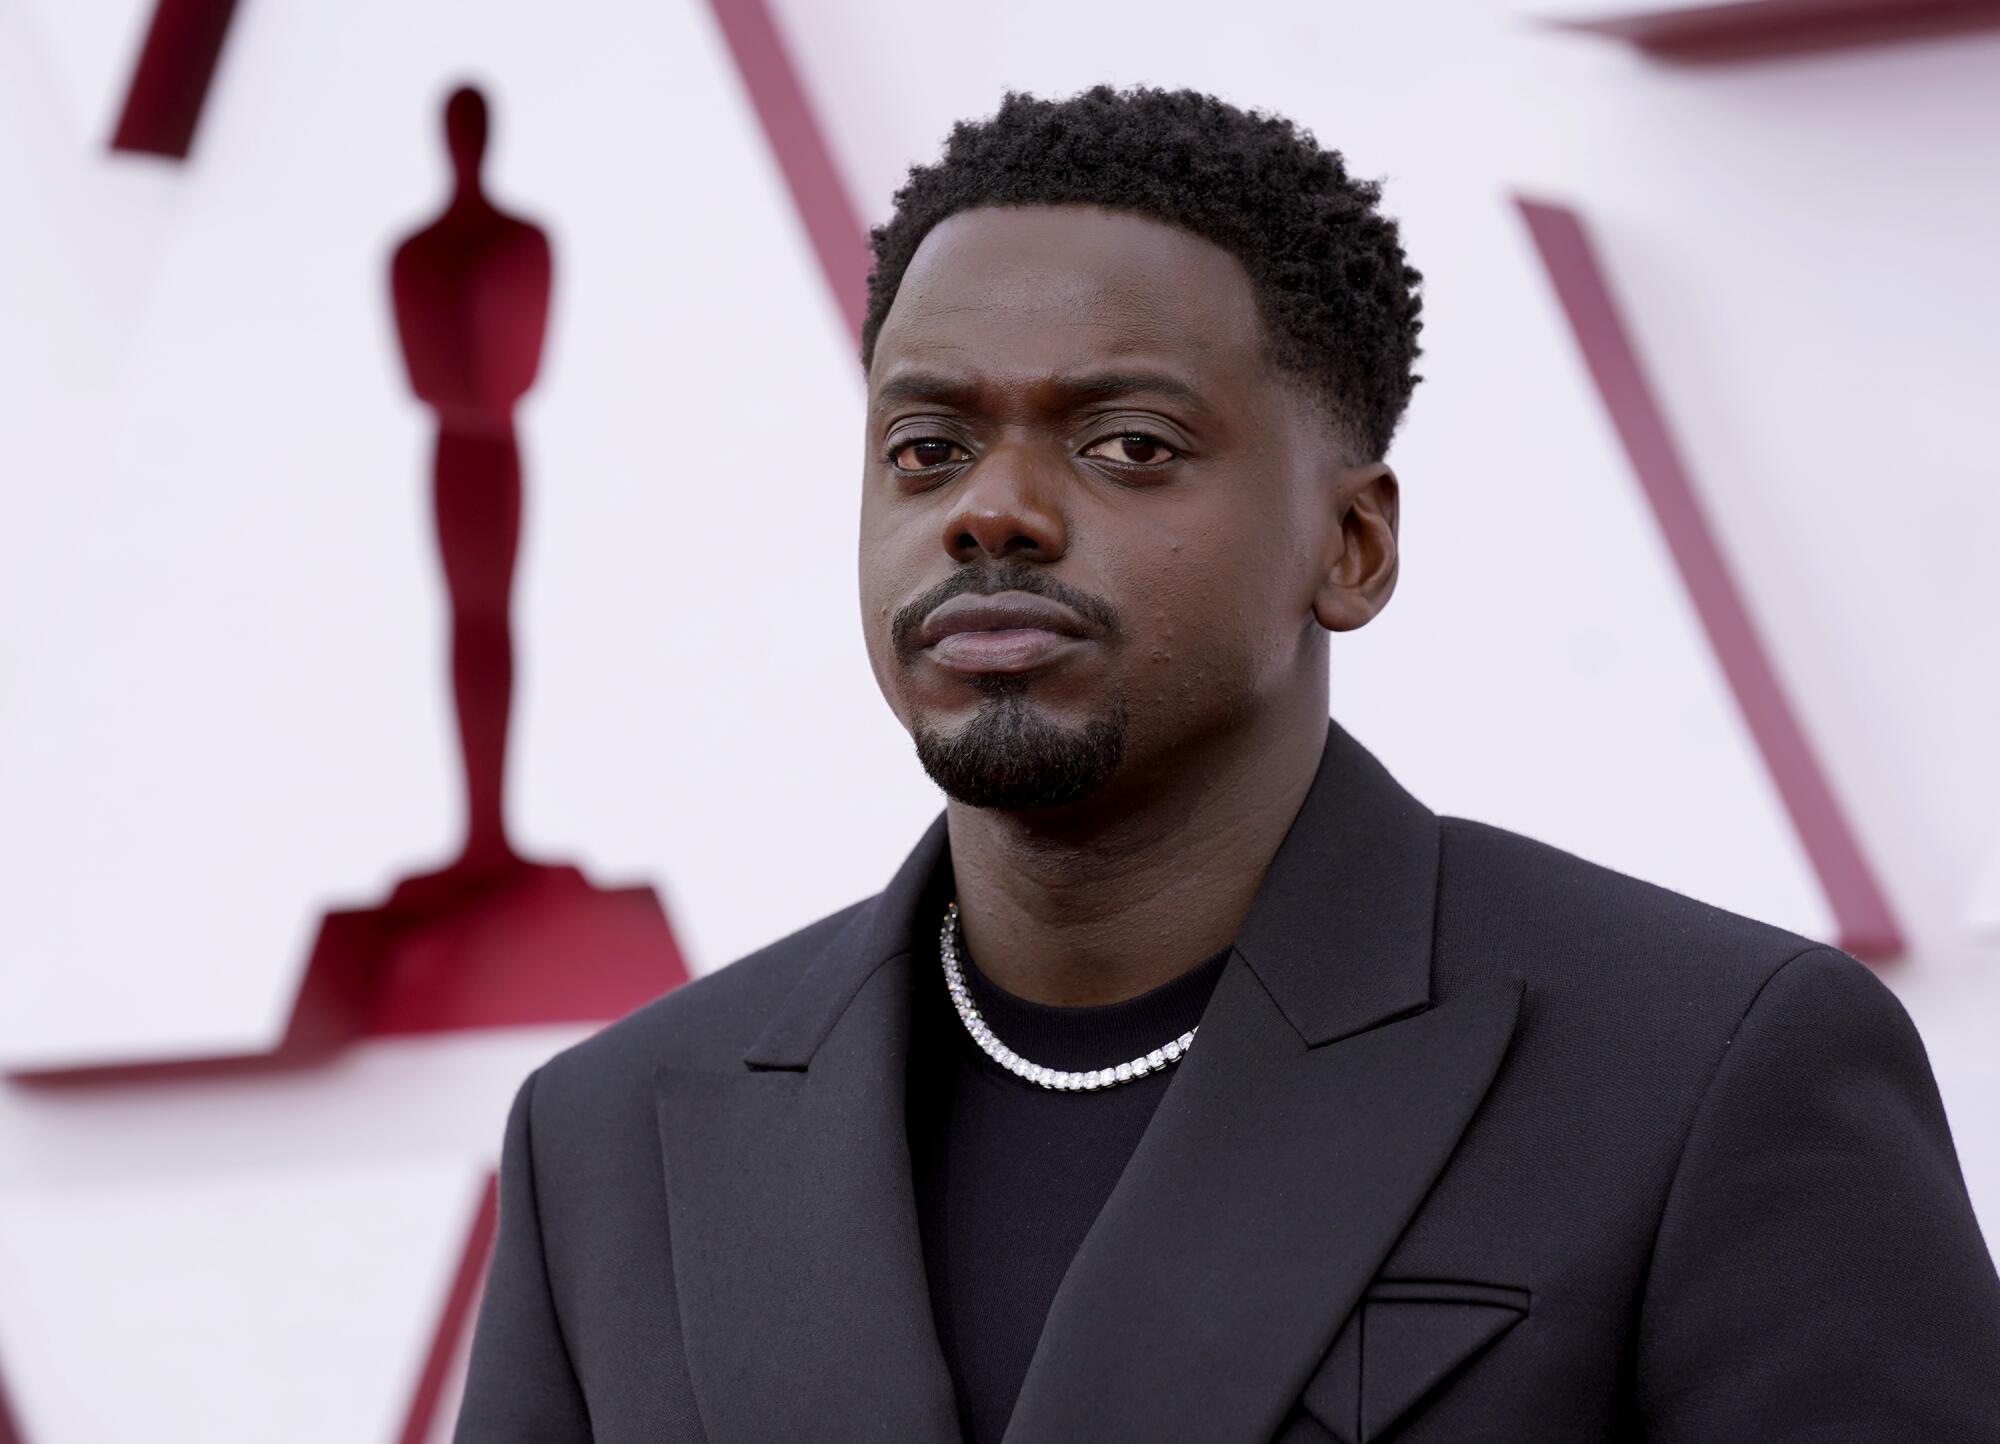 Daniel Kaluuya in a black jacket over a black shirt with a white necklace